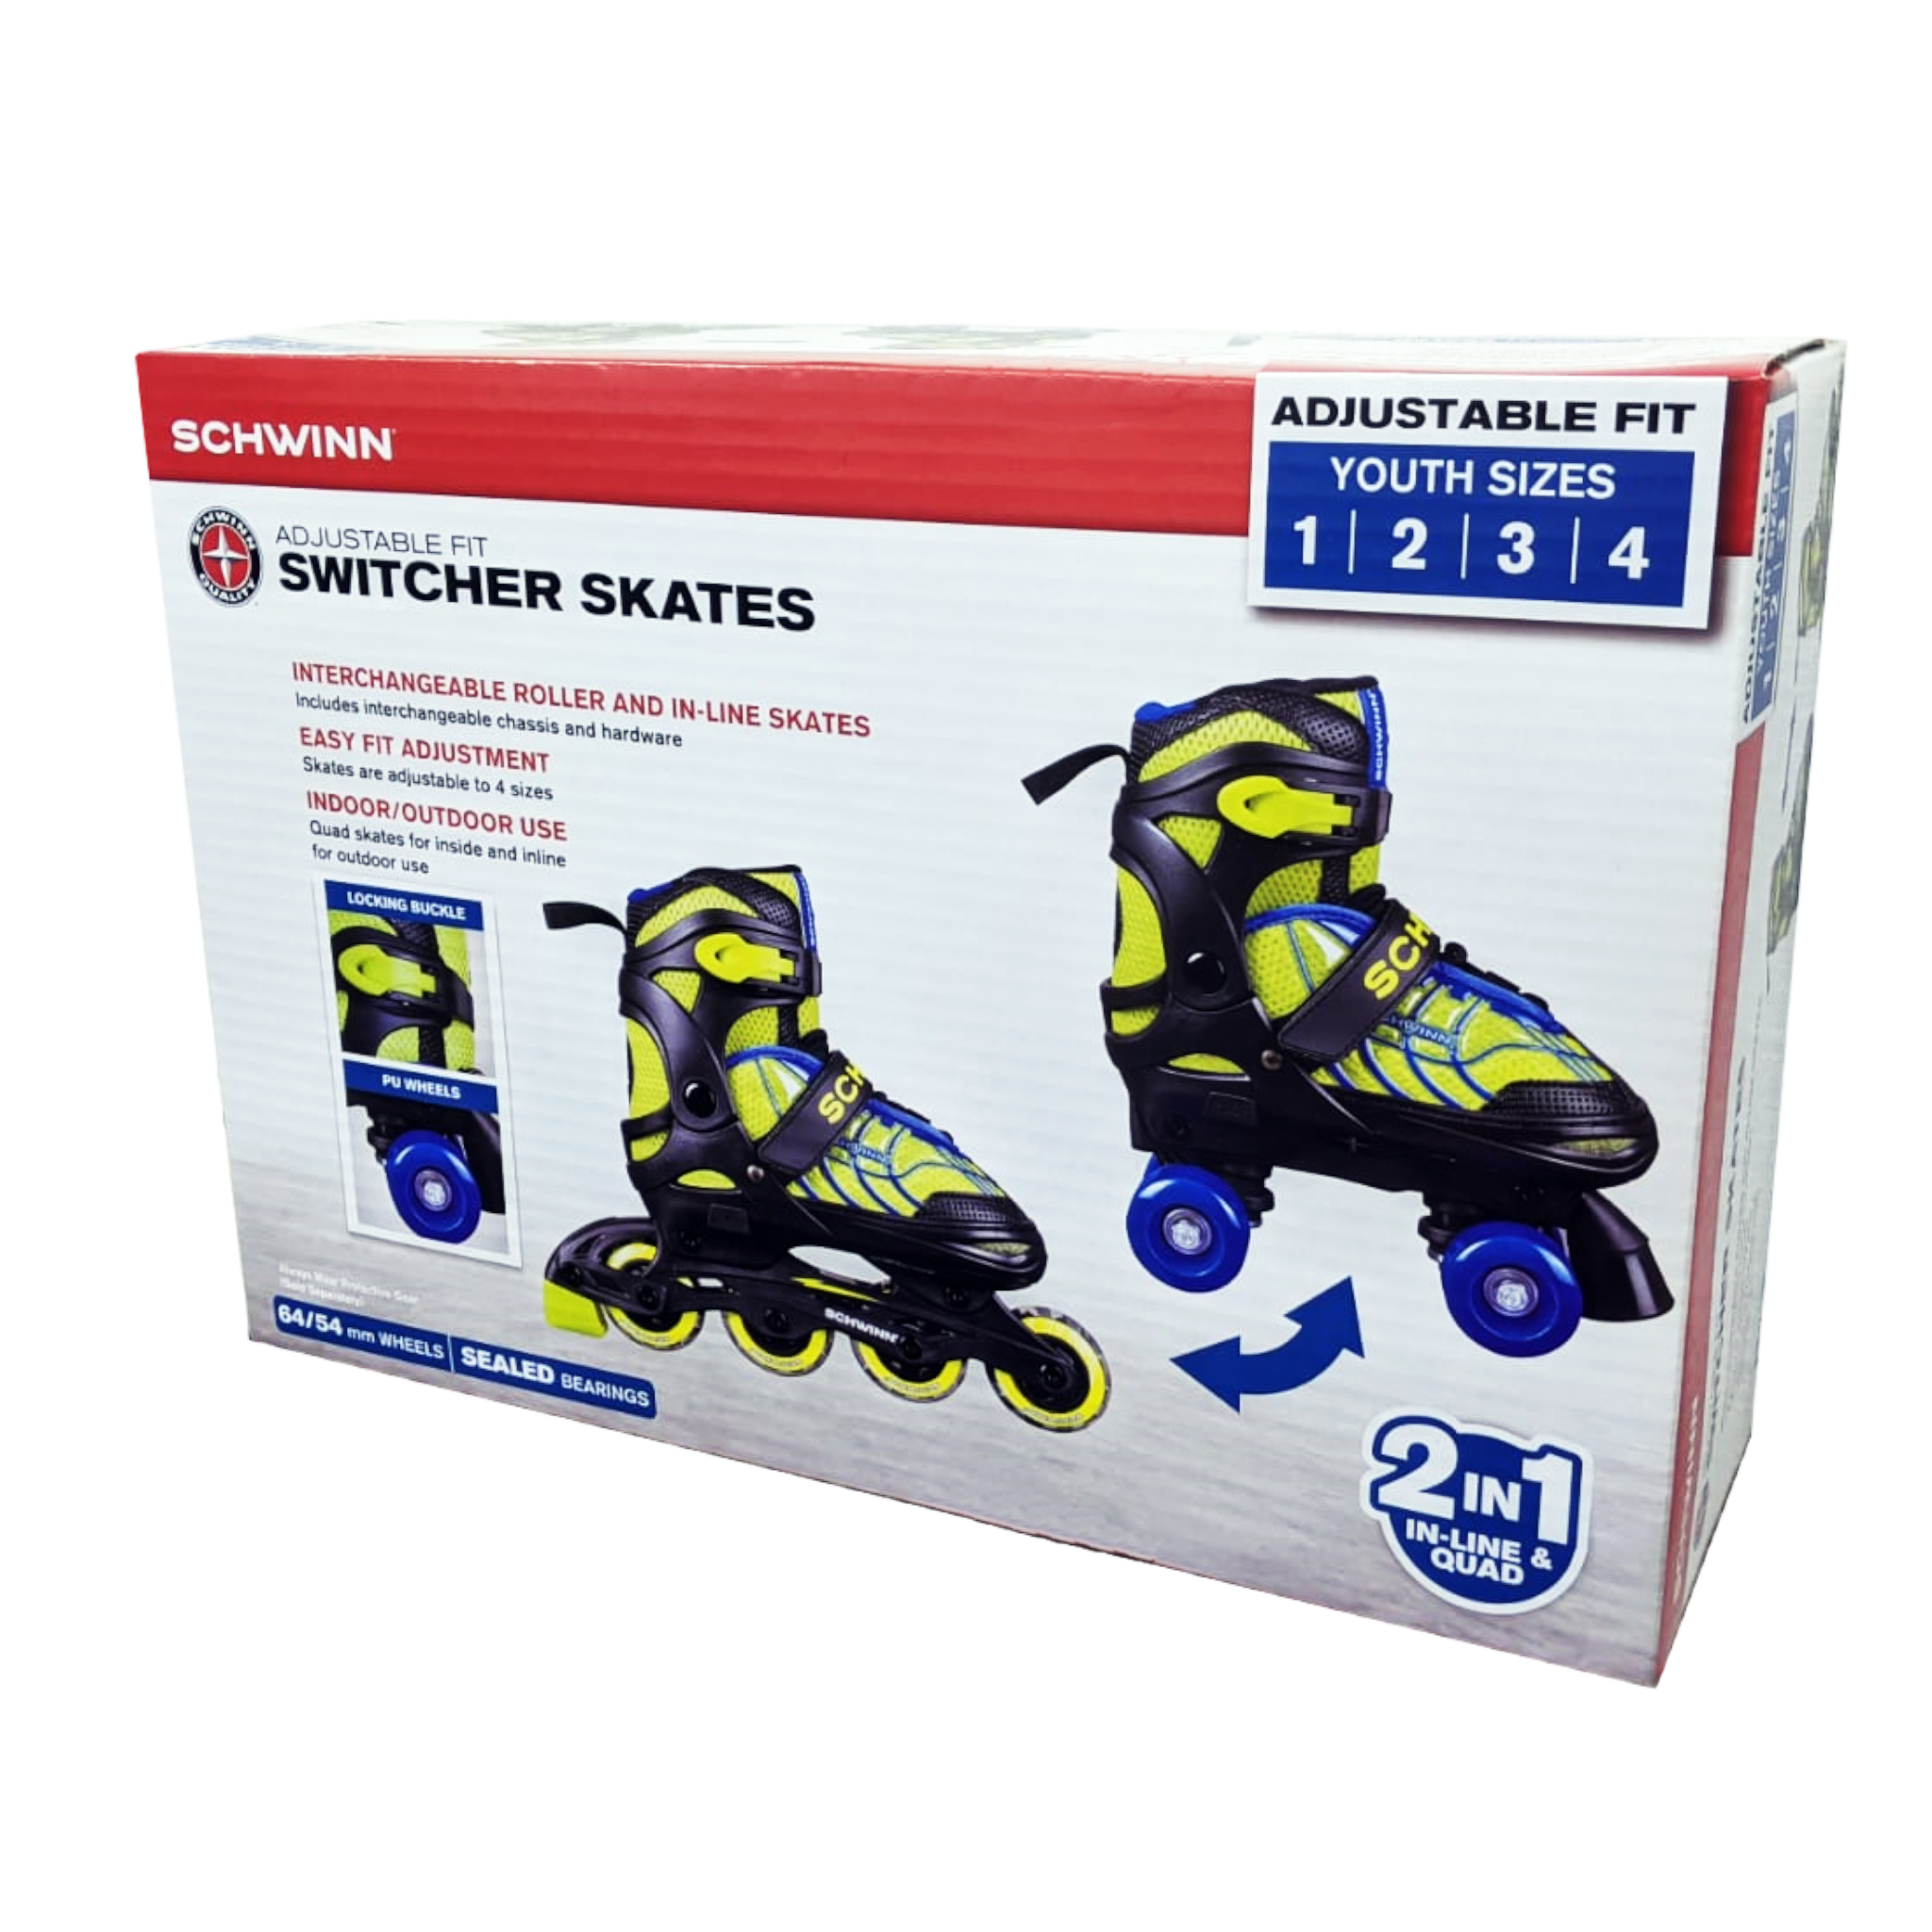 Schwinn Switcher Boys 2 in 1 Quad Skates and InLine Skates combo. Easily converts from Quad Skates to InLine Skates. Adjustable to fit sizes Kids sizes 1-4. Perfect childrens beginner roller skates. - Pro-Distributing